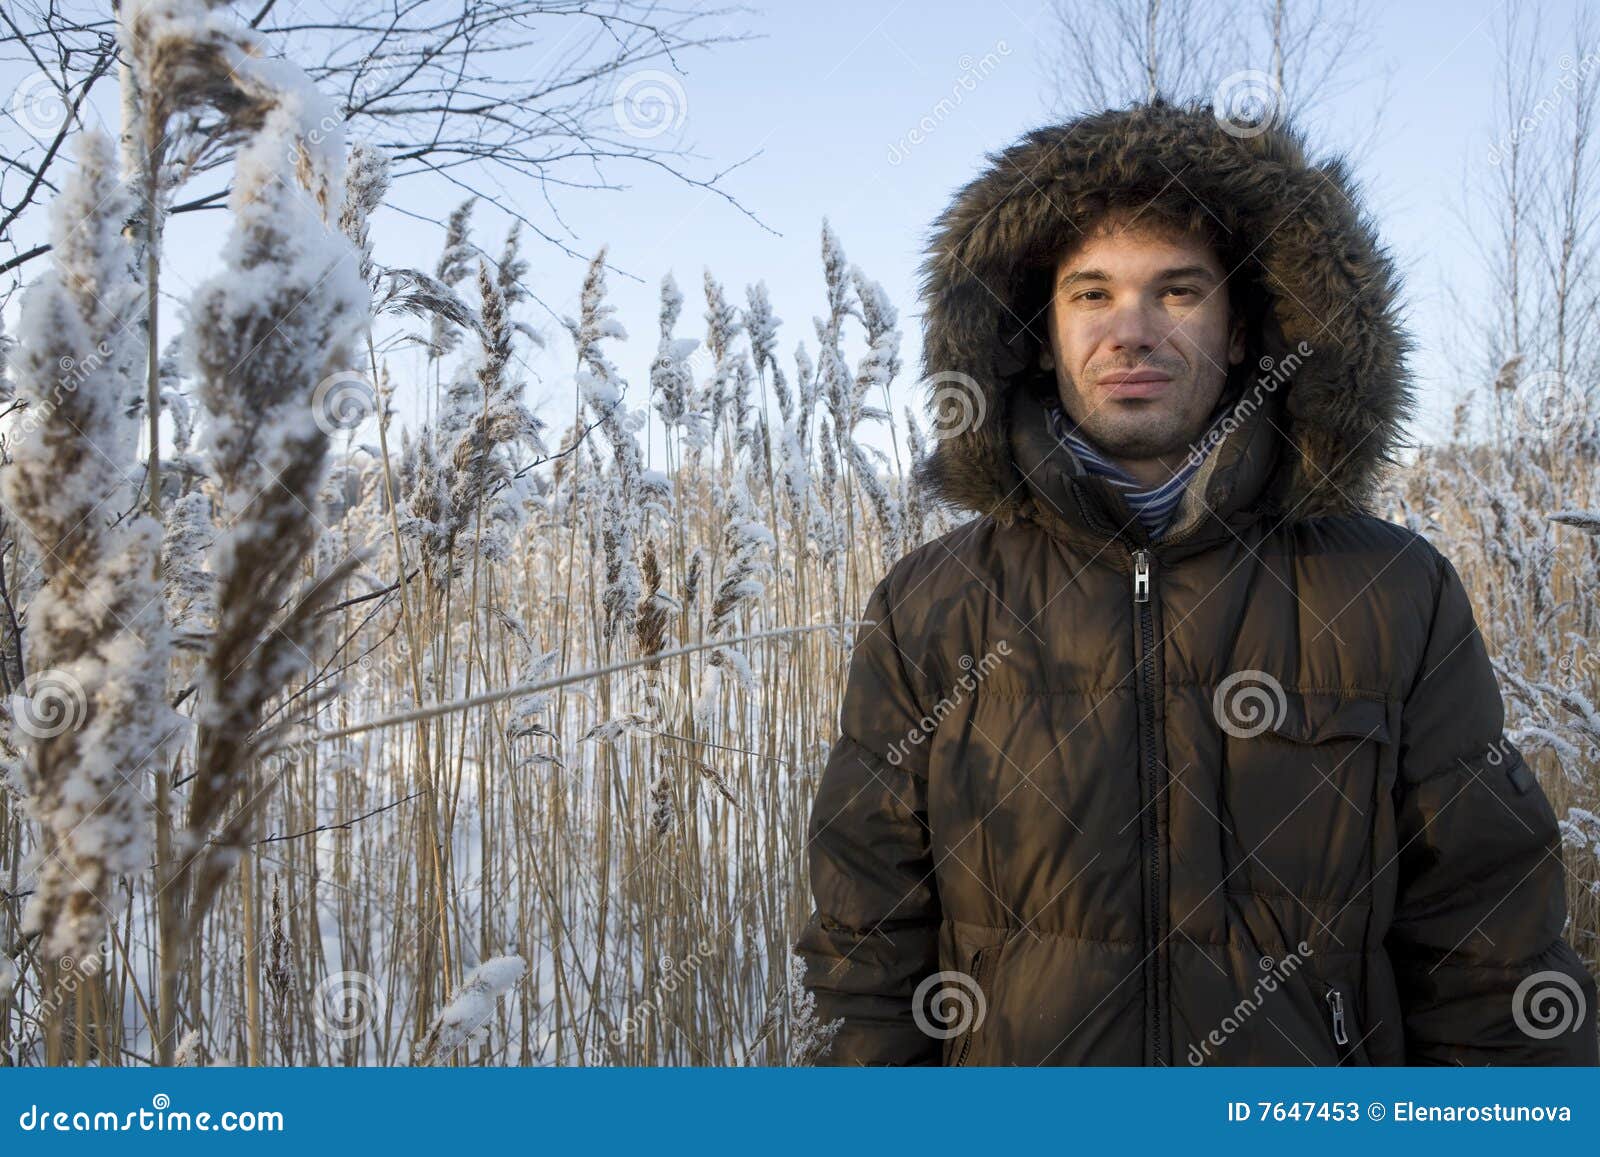 Middle-age Man. Winter Time Stock Image - Image of winter, middleage ...